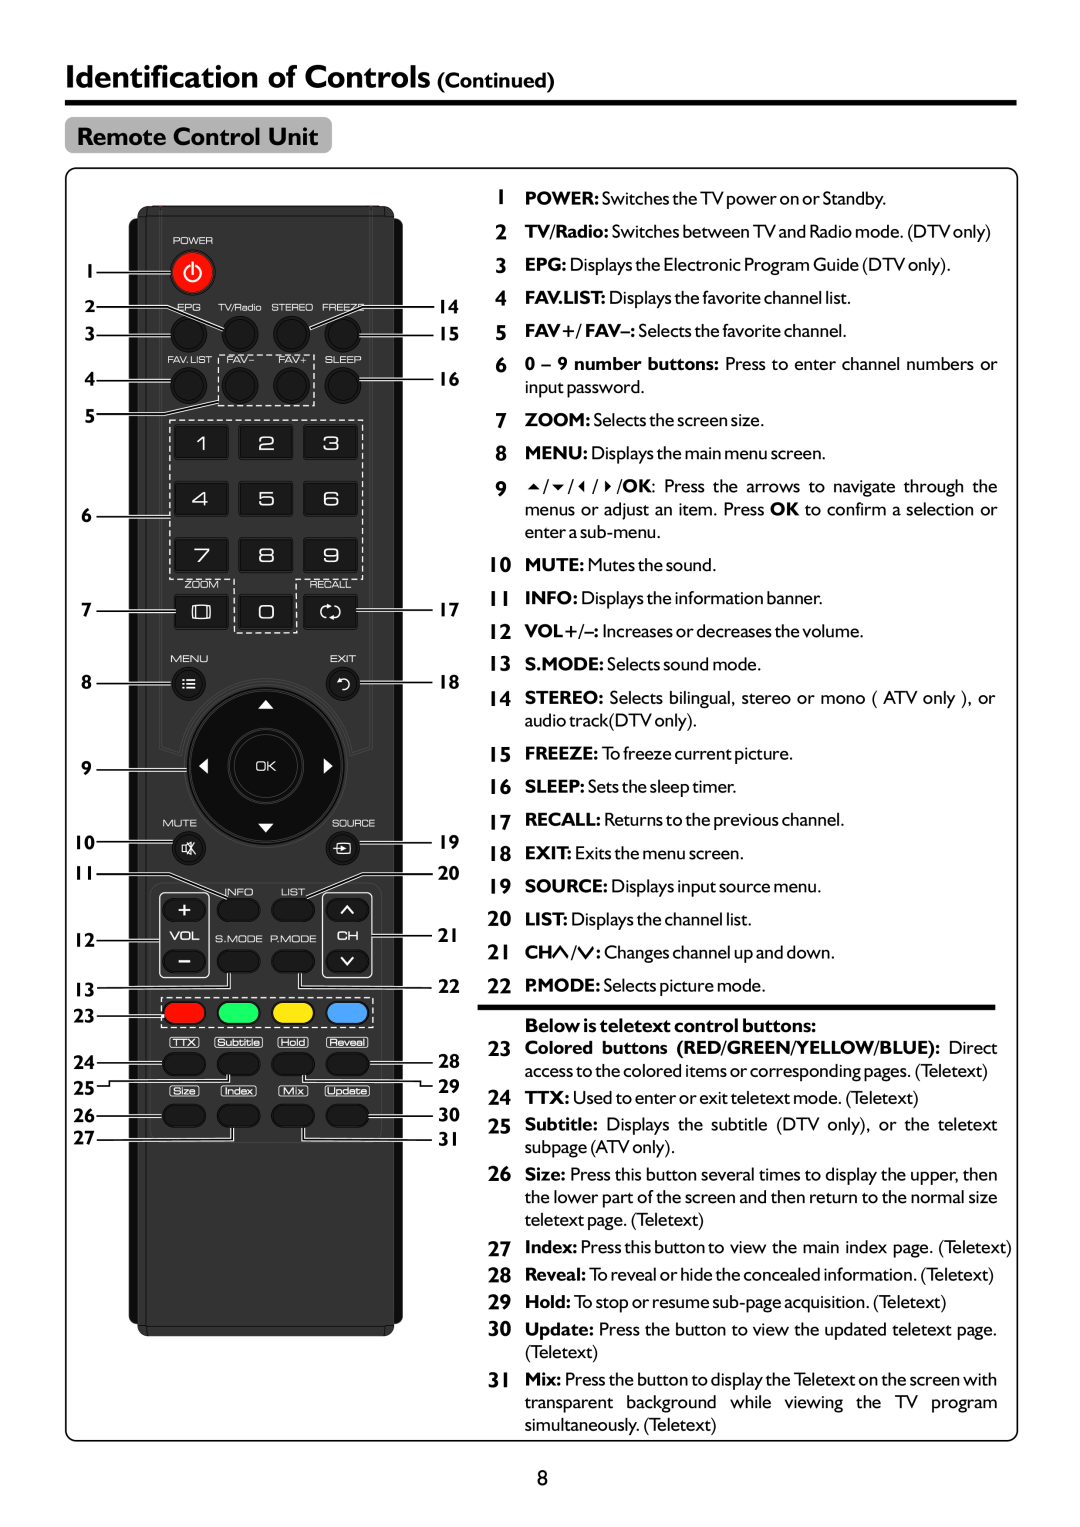 Palsonic TFTV815HD Remote Control Unit, Identification of Controls Continued, Below is teletext control buttons 